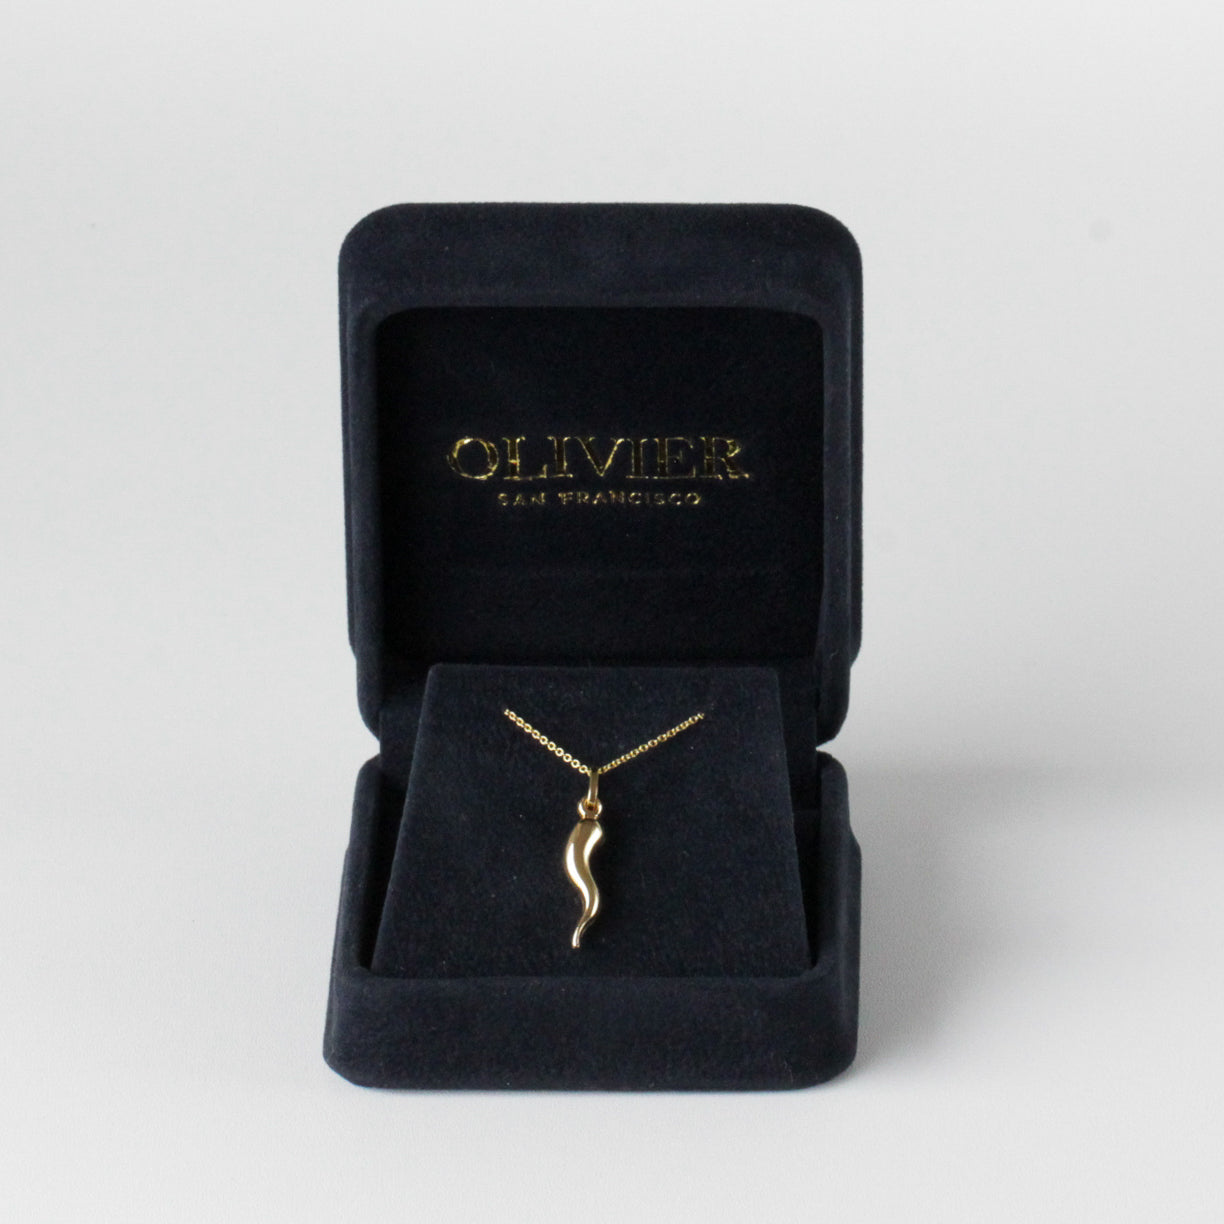 gold pendant necklace in box